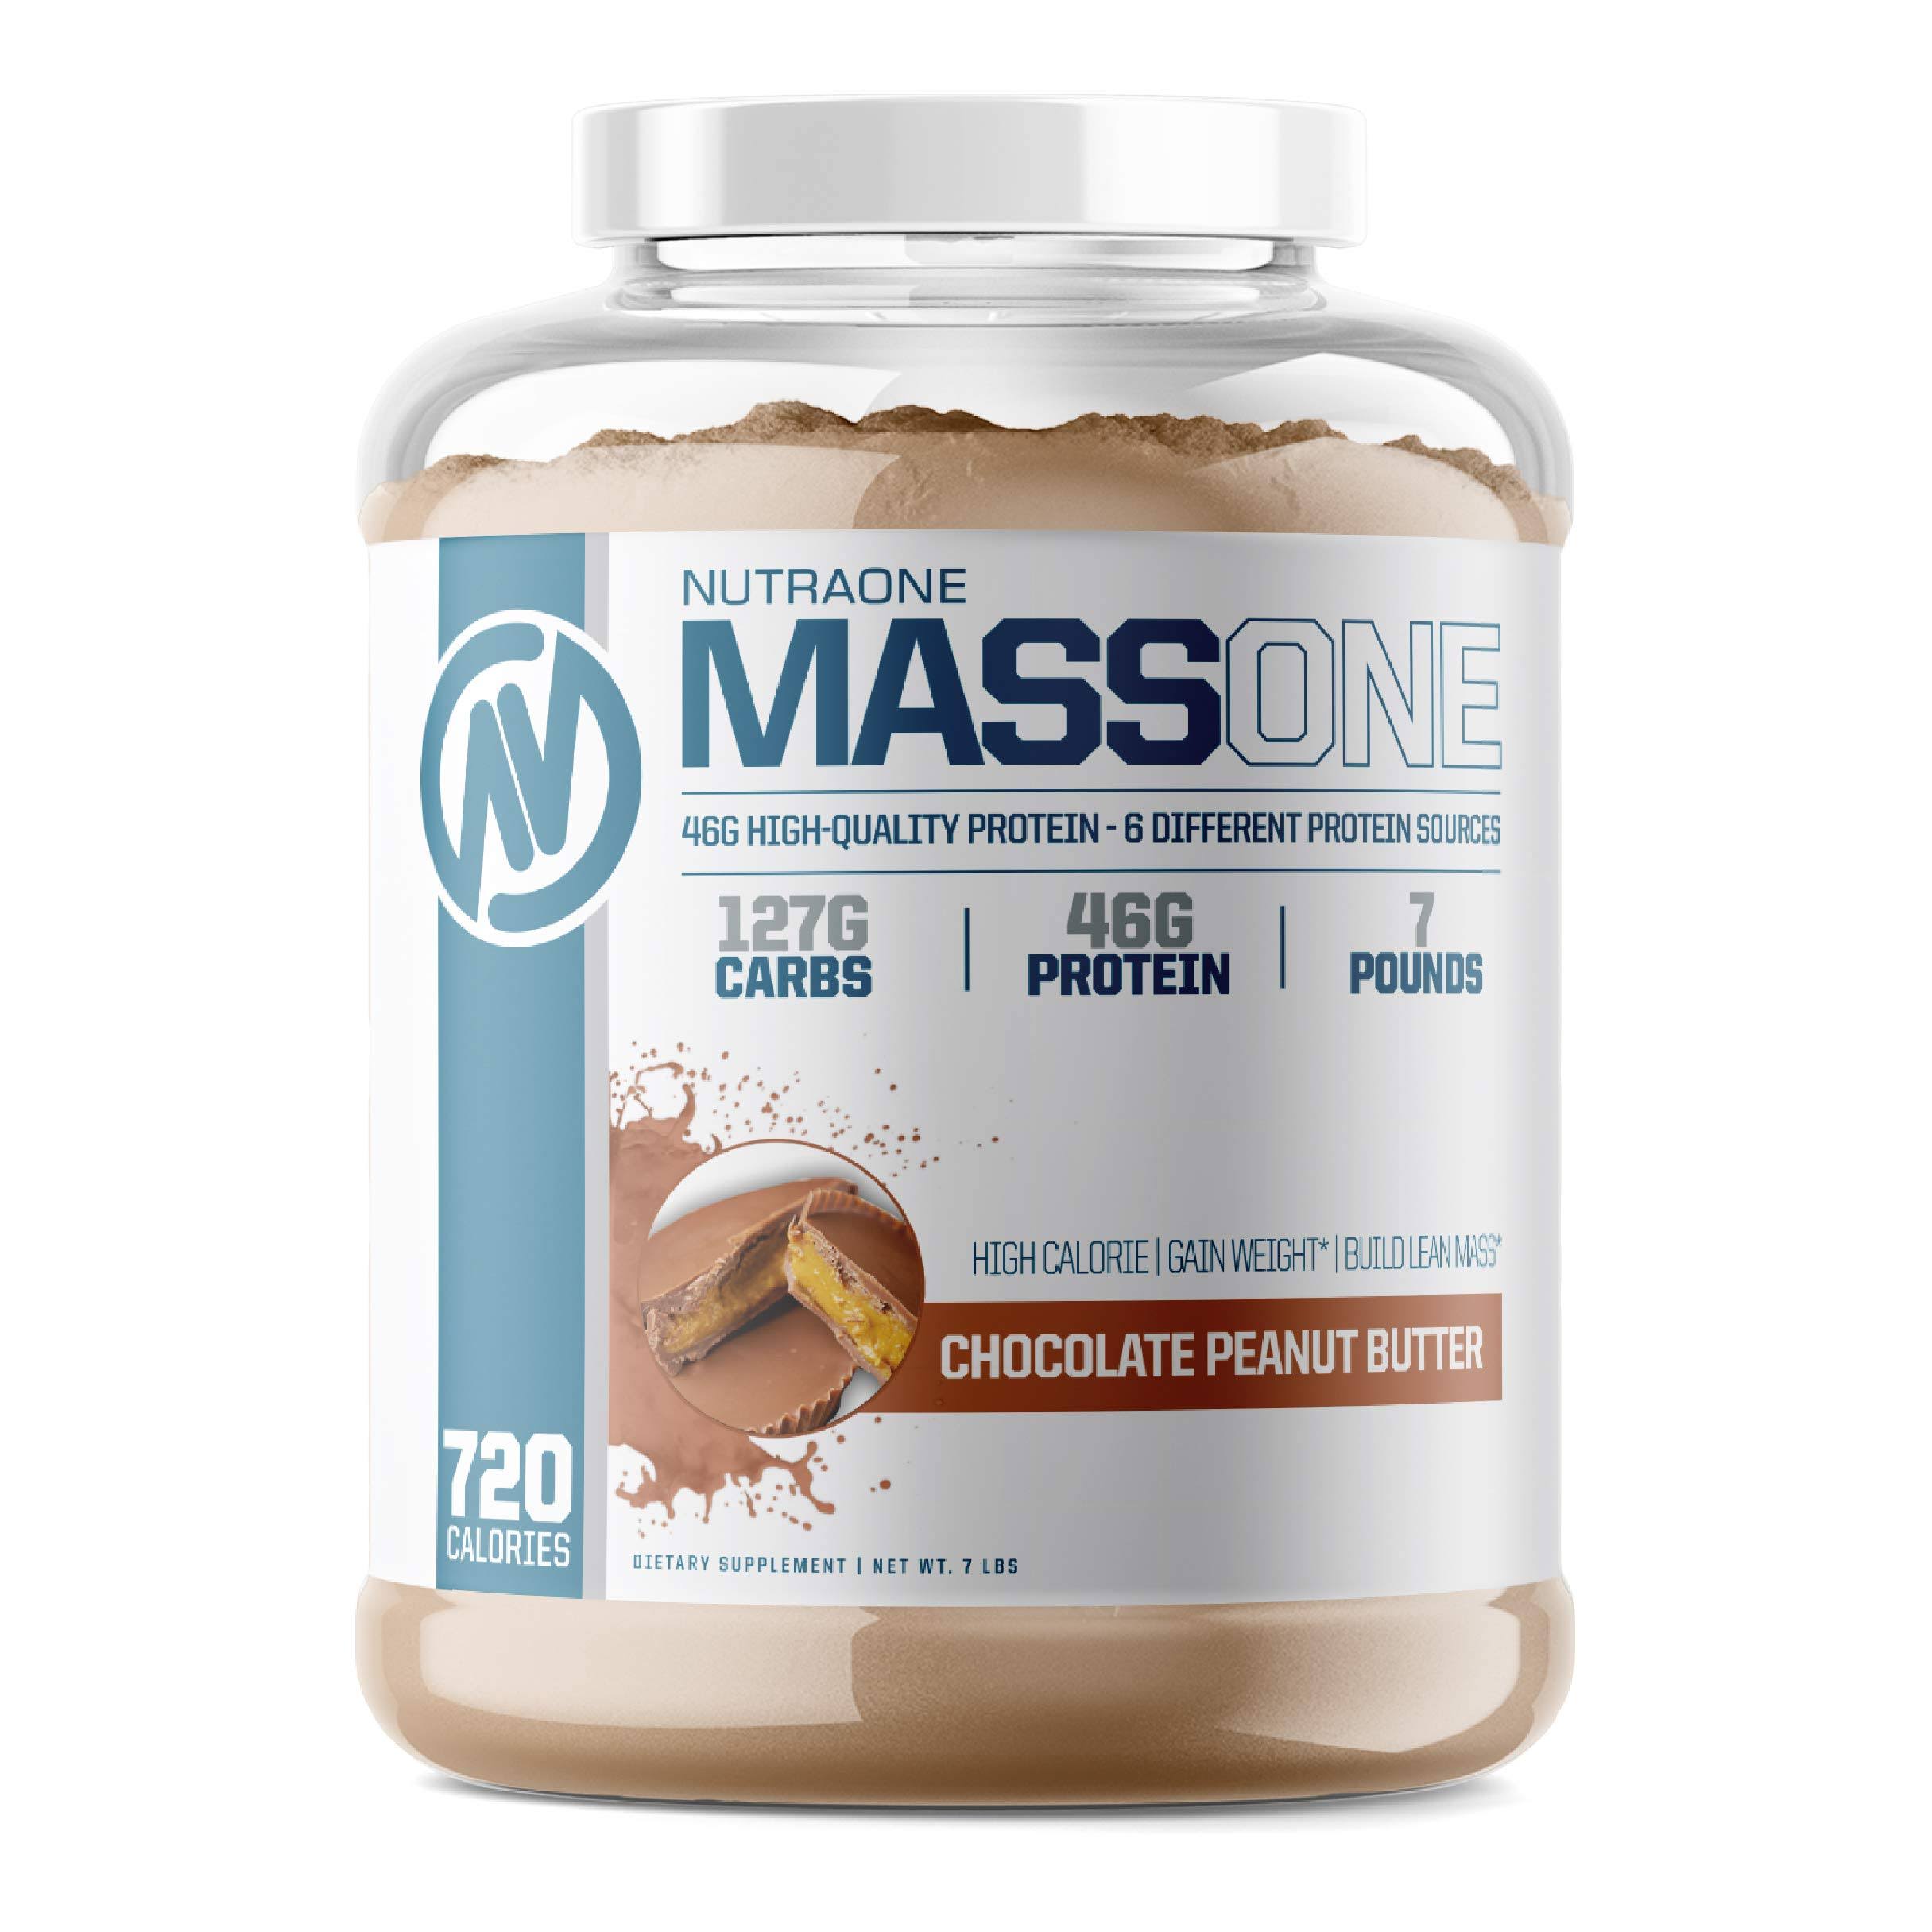 Massone Mass Gainer Protein Powder by NutraOne – Gain Weight Protein Meal Replacement (Gourmet Chocolate - 7 lbs.)